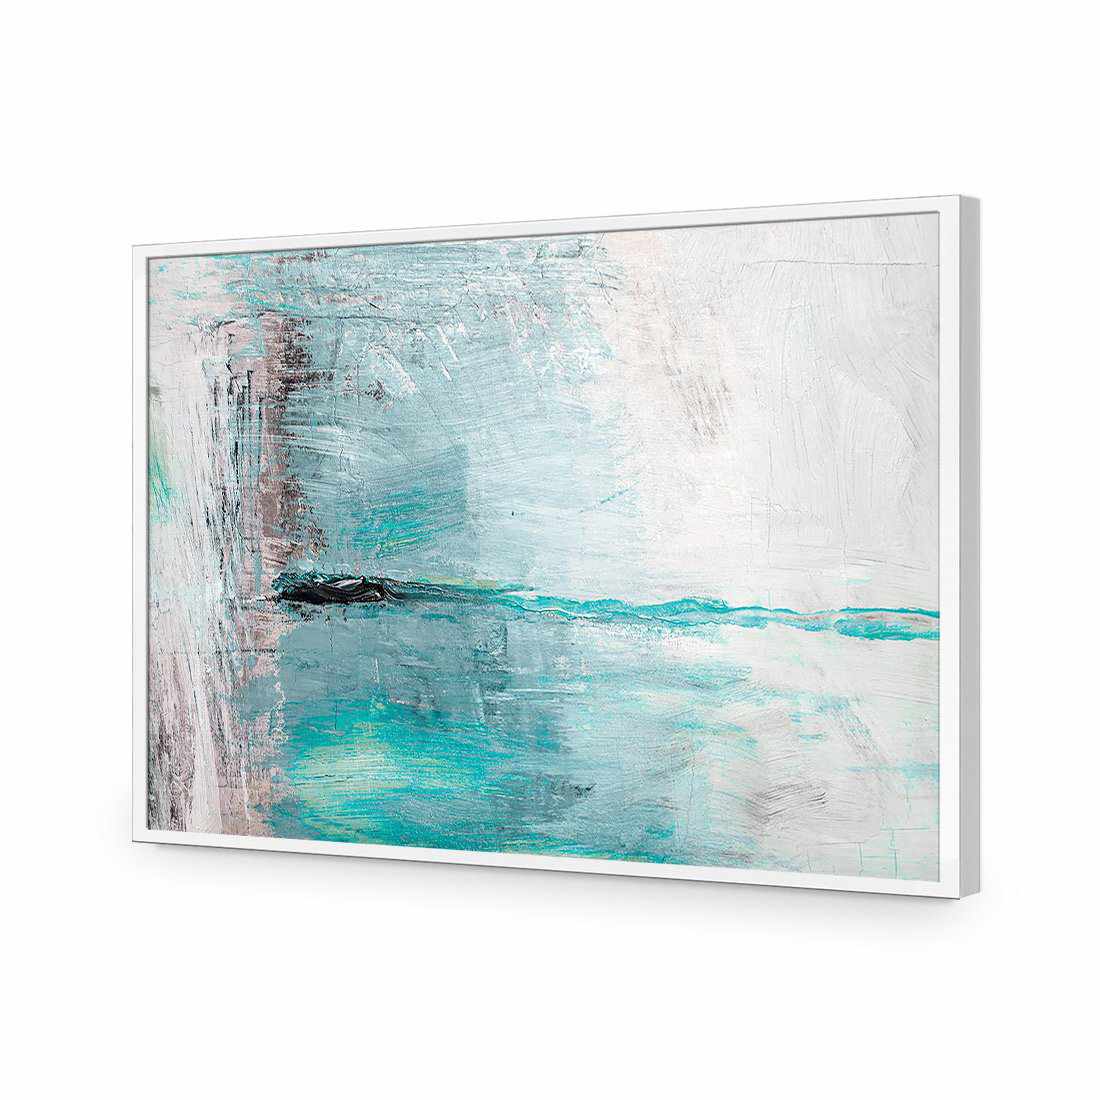 Painting The Sky-Acrylic-Wall Art Design-Without Border-Acrylic - White Frame-45x30cm-Wall Art Designs